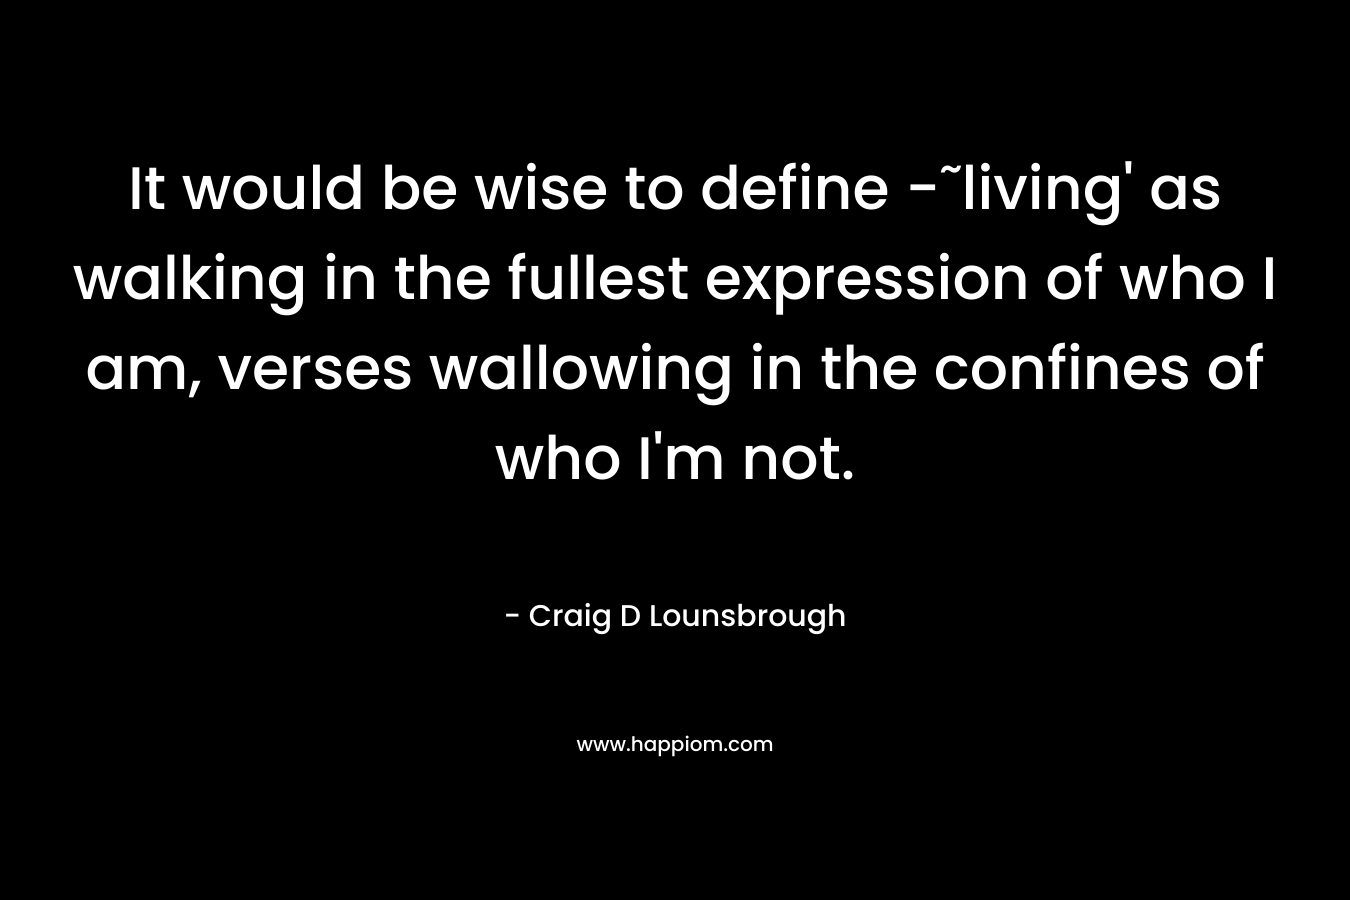 It would be wise to define -˜living' as walking in the fullest expression of who I am, verses wallowing in the confines of who I'm not.